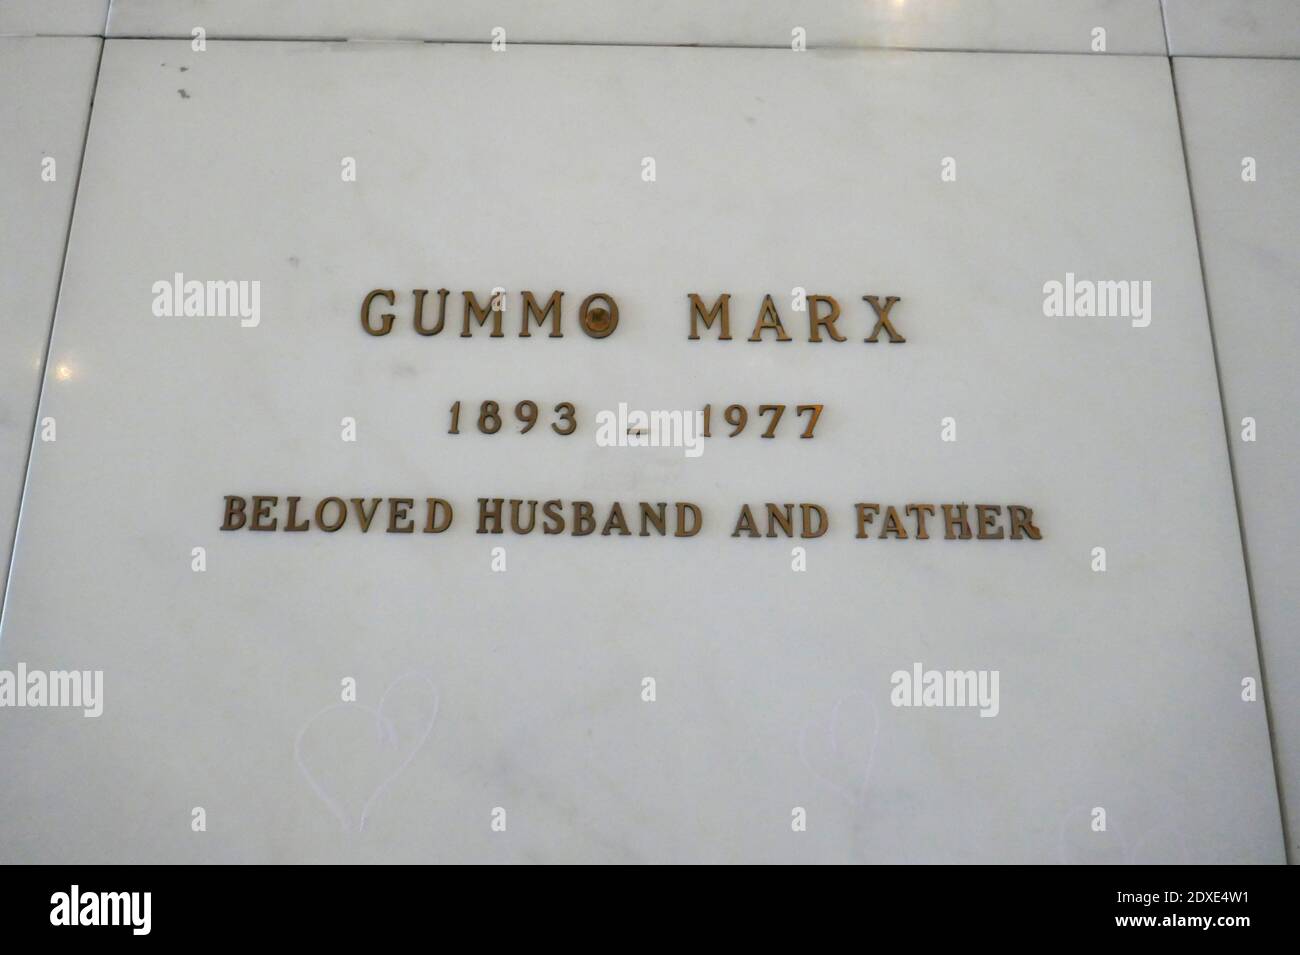 Glendale, California, USA 23rd December 2020 A general view of atmosphere of actor Gummo Marx's Grave in Patriots Terrace in Corridor of the Patriots in Sanctuary of Brotherhood at Freedom Mausoleum at Forest Lawn Memorial Park on December 23, 2020 in Glendale, California, USA. Photo by Barry King/Alamy Stock Photo Stock Photo